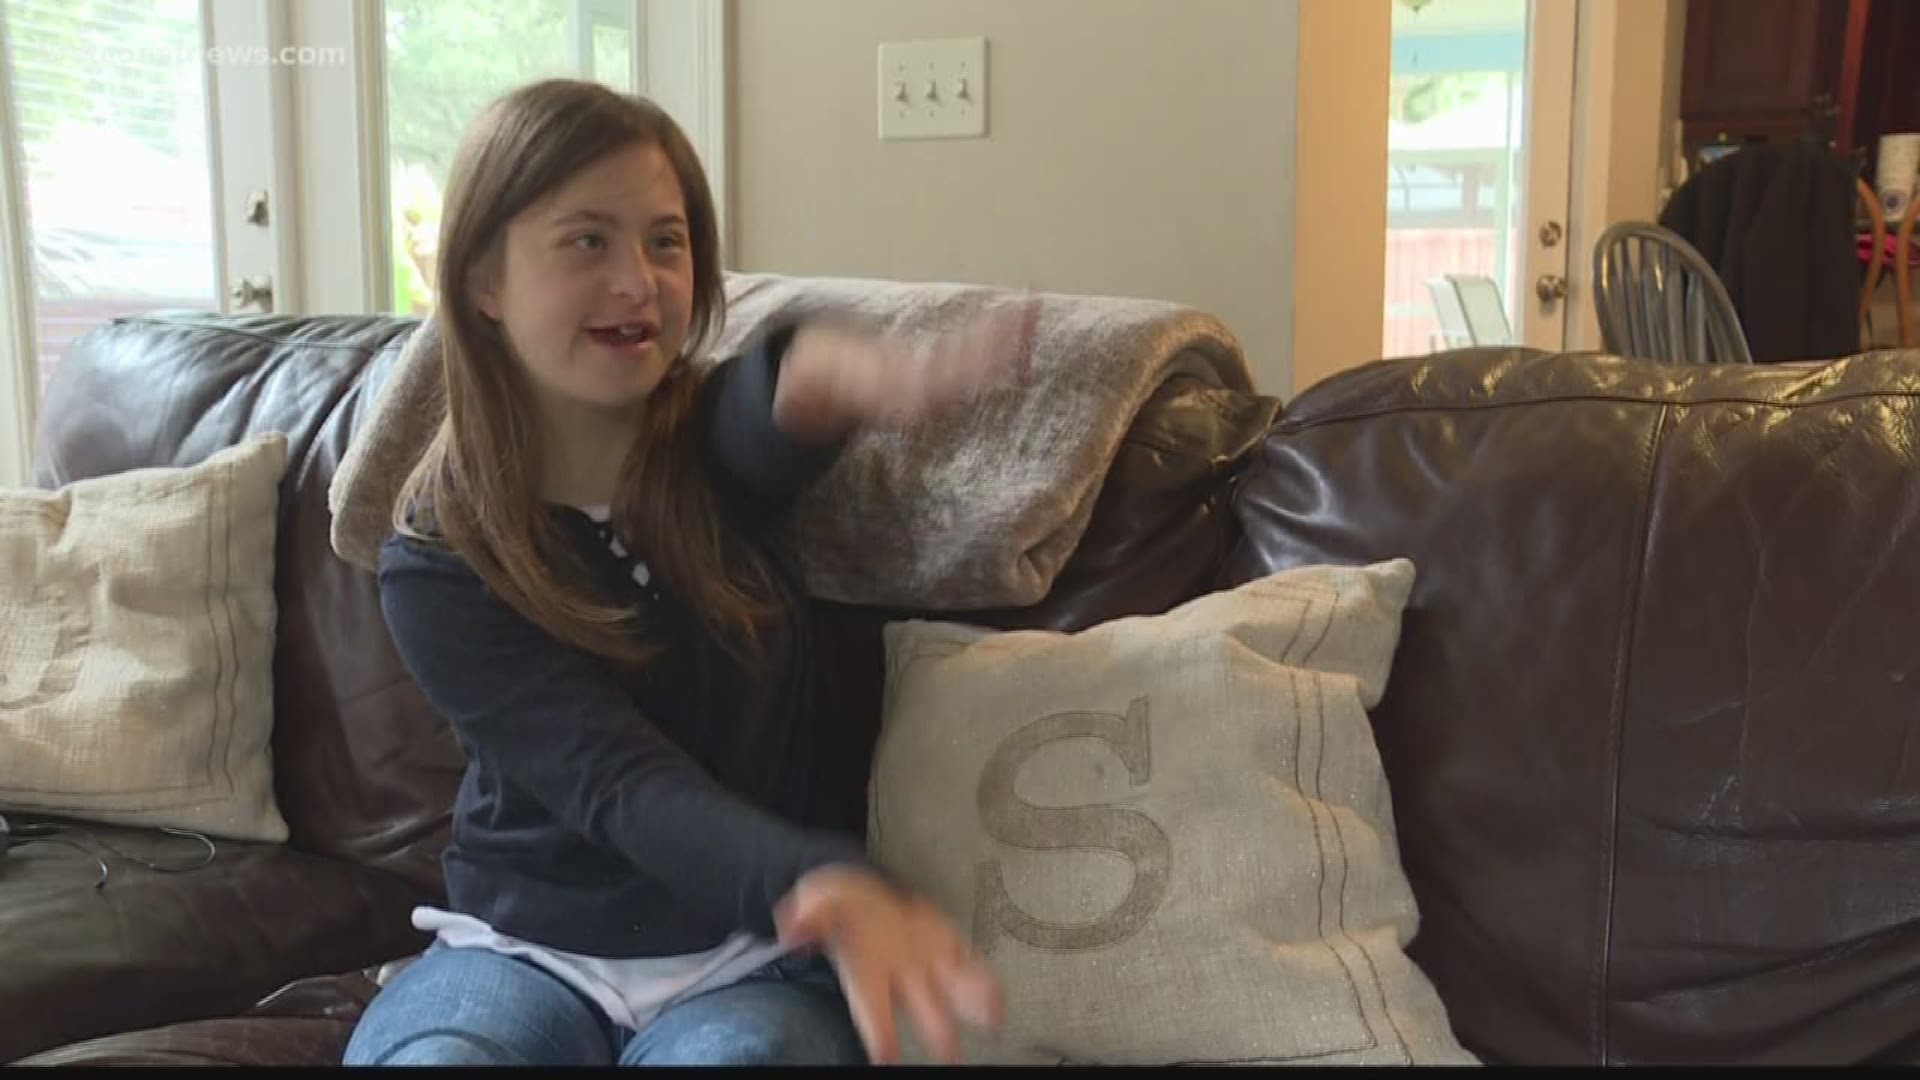 The Down Syndrome Association of Jacksonville plans to officially launch their new academy later this year.